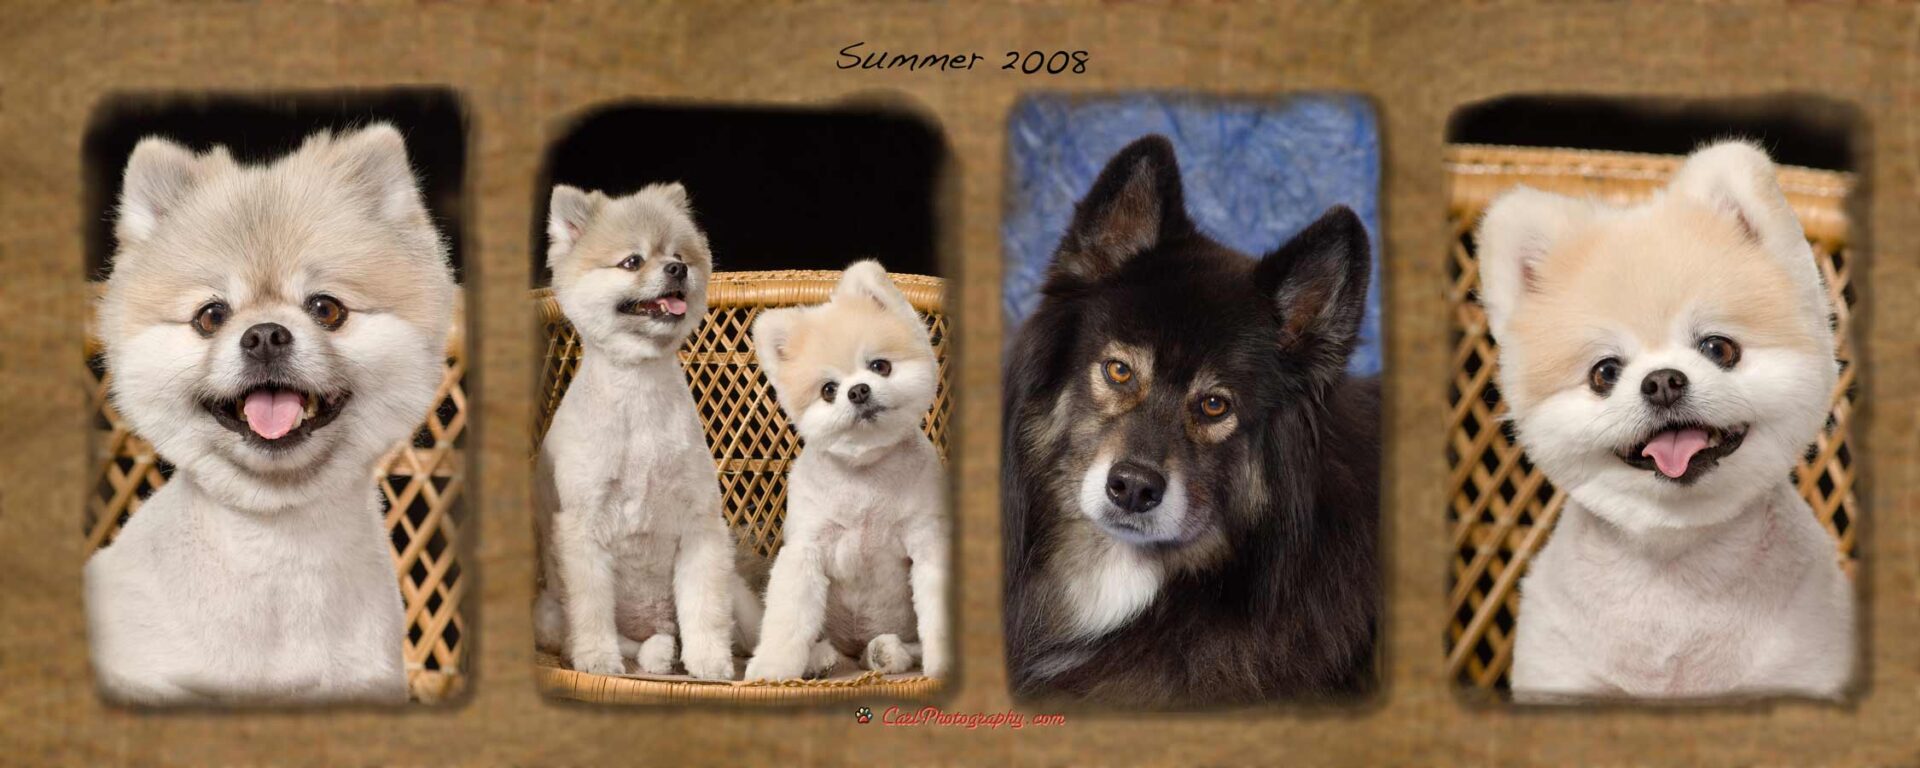 Two pictures of dogs are shown side by side.